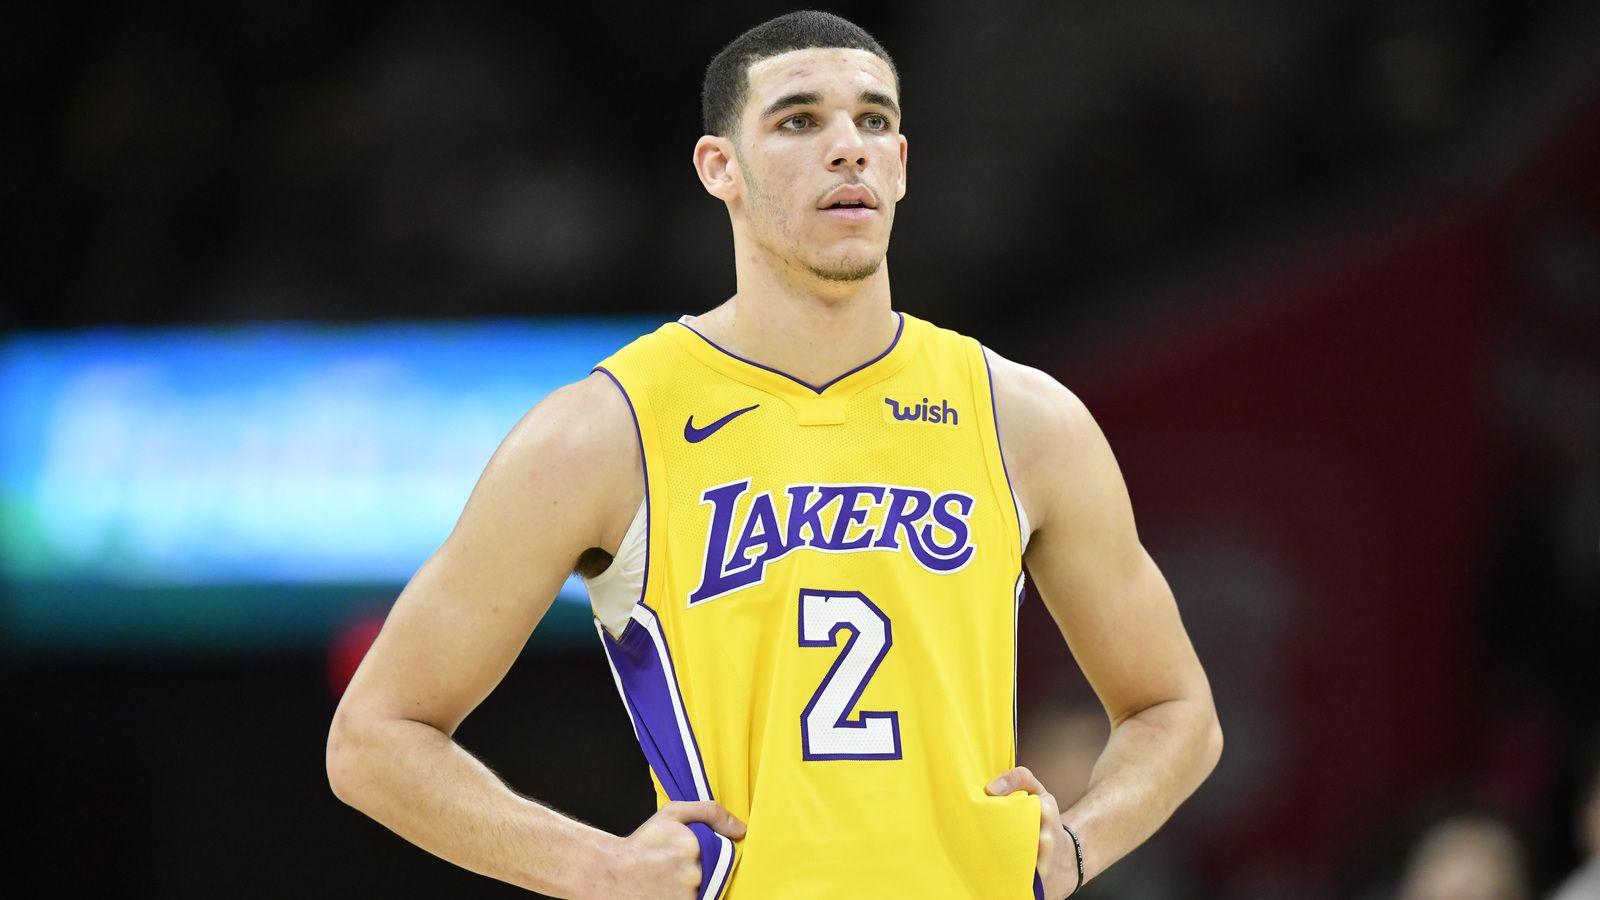 Lakers news: Lonzo Ball likely out Friday vs. Pacers